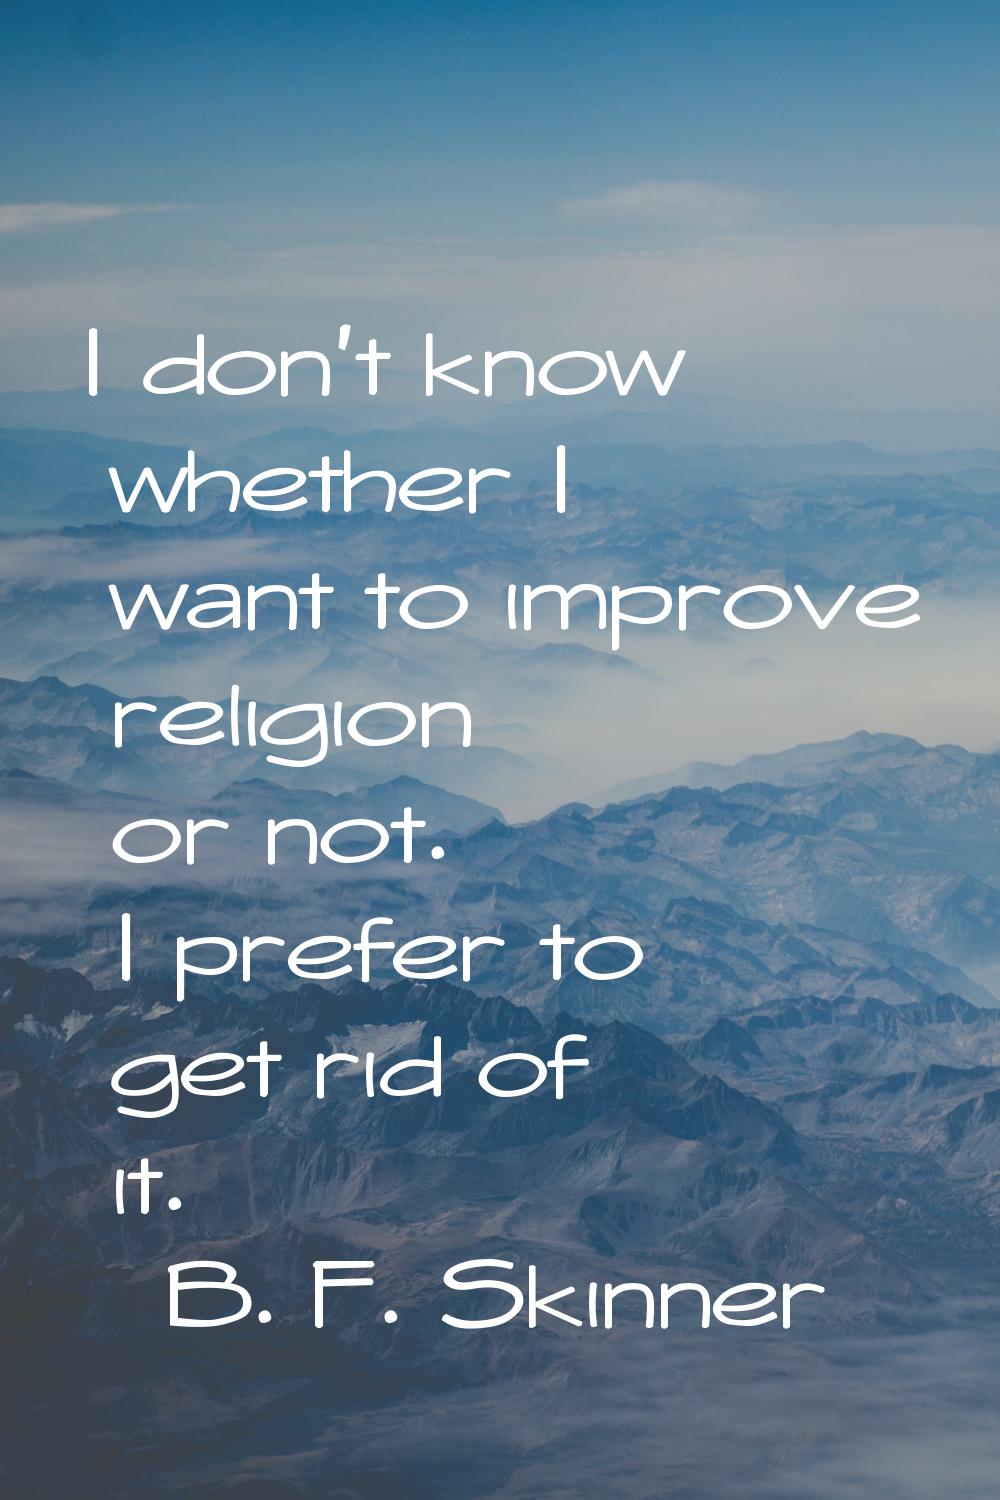 I don't know whether I want to improve religion or not. I prefer to get rid of it.